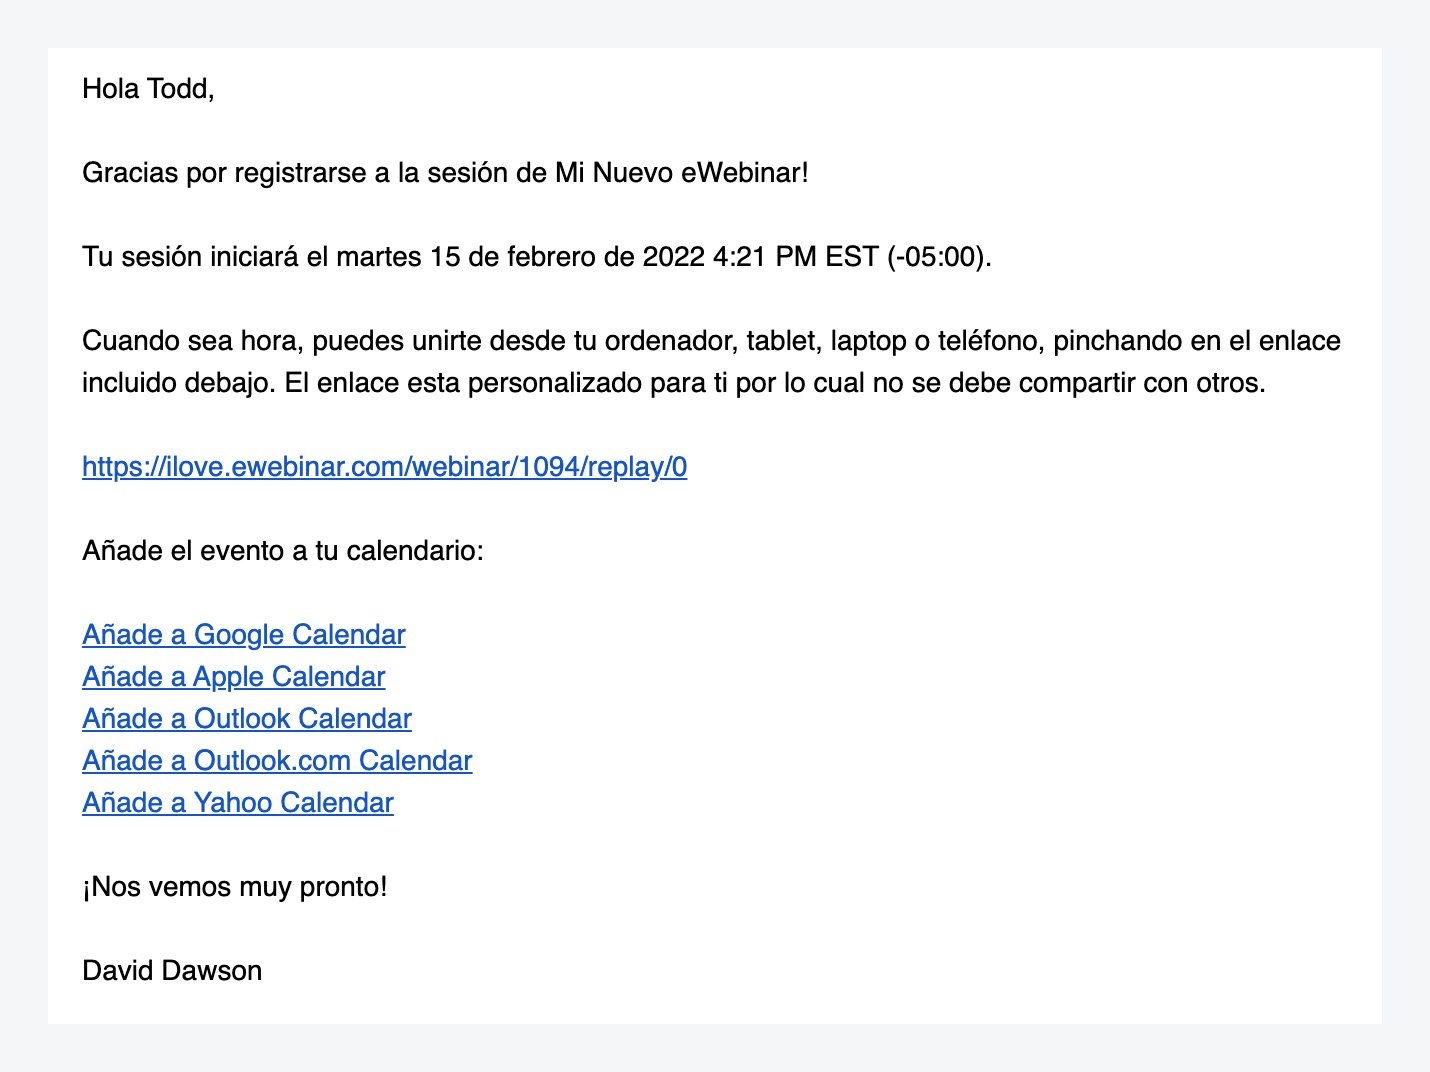 Confirmation email in standard eWebinar template in Spanish